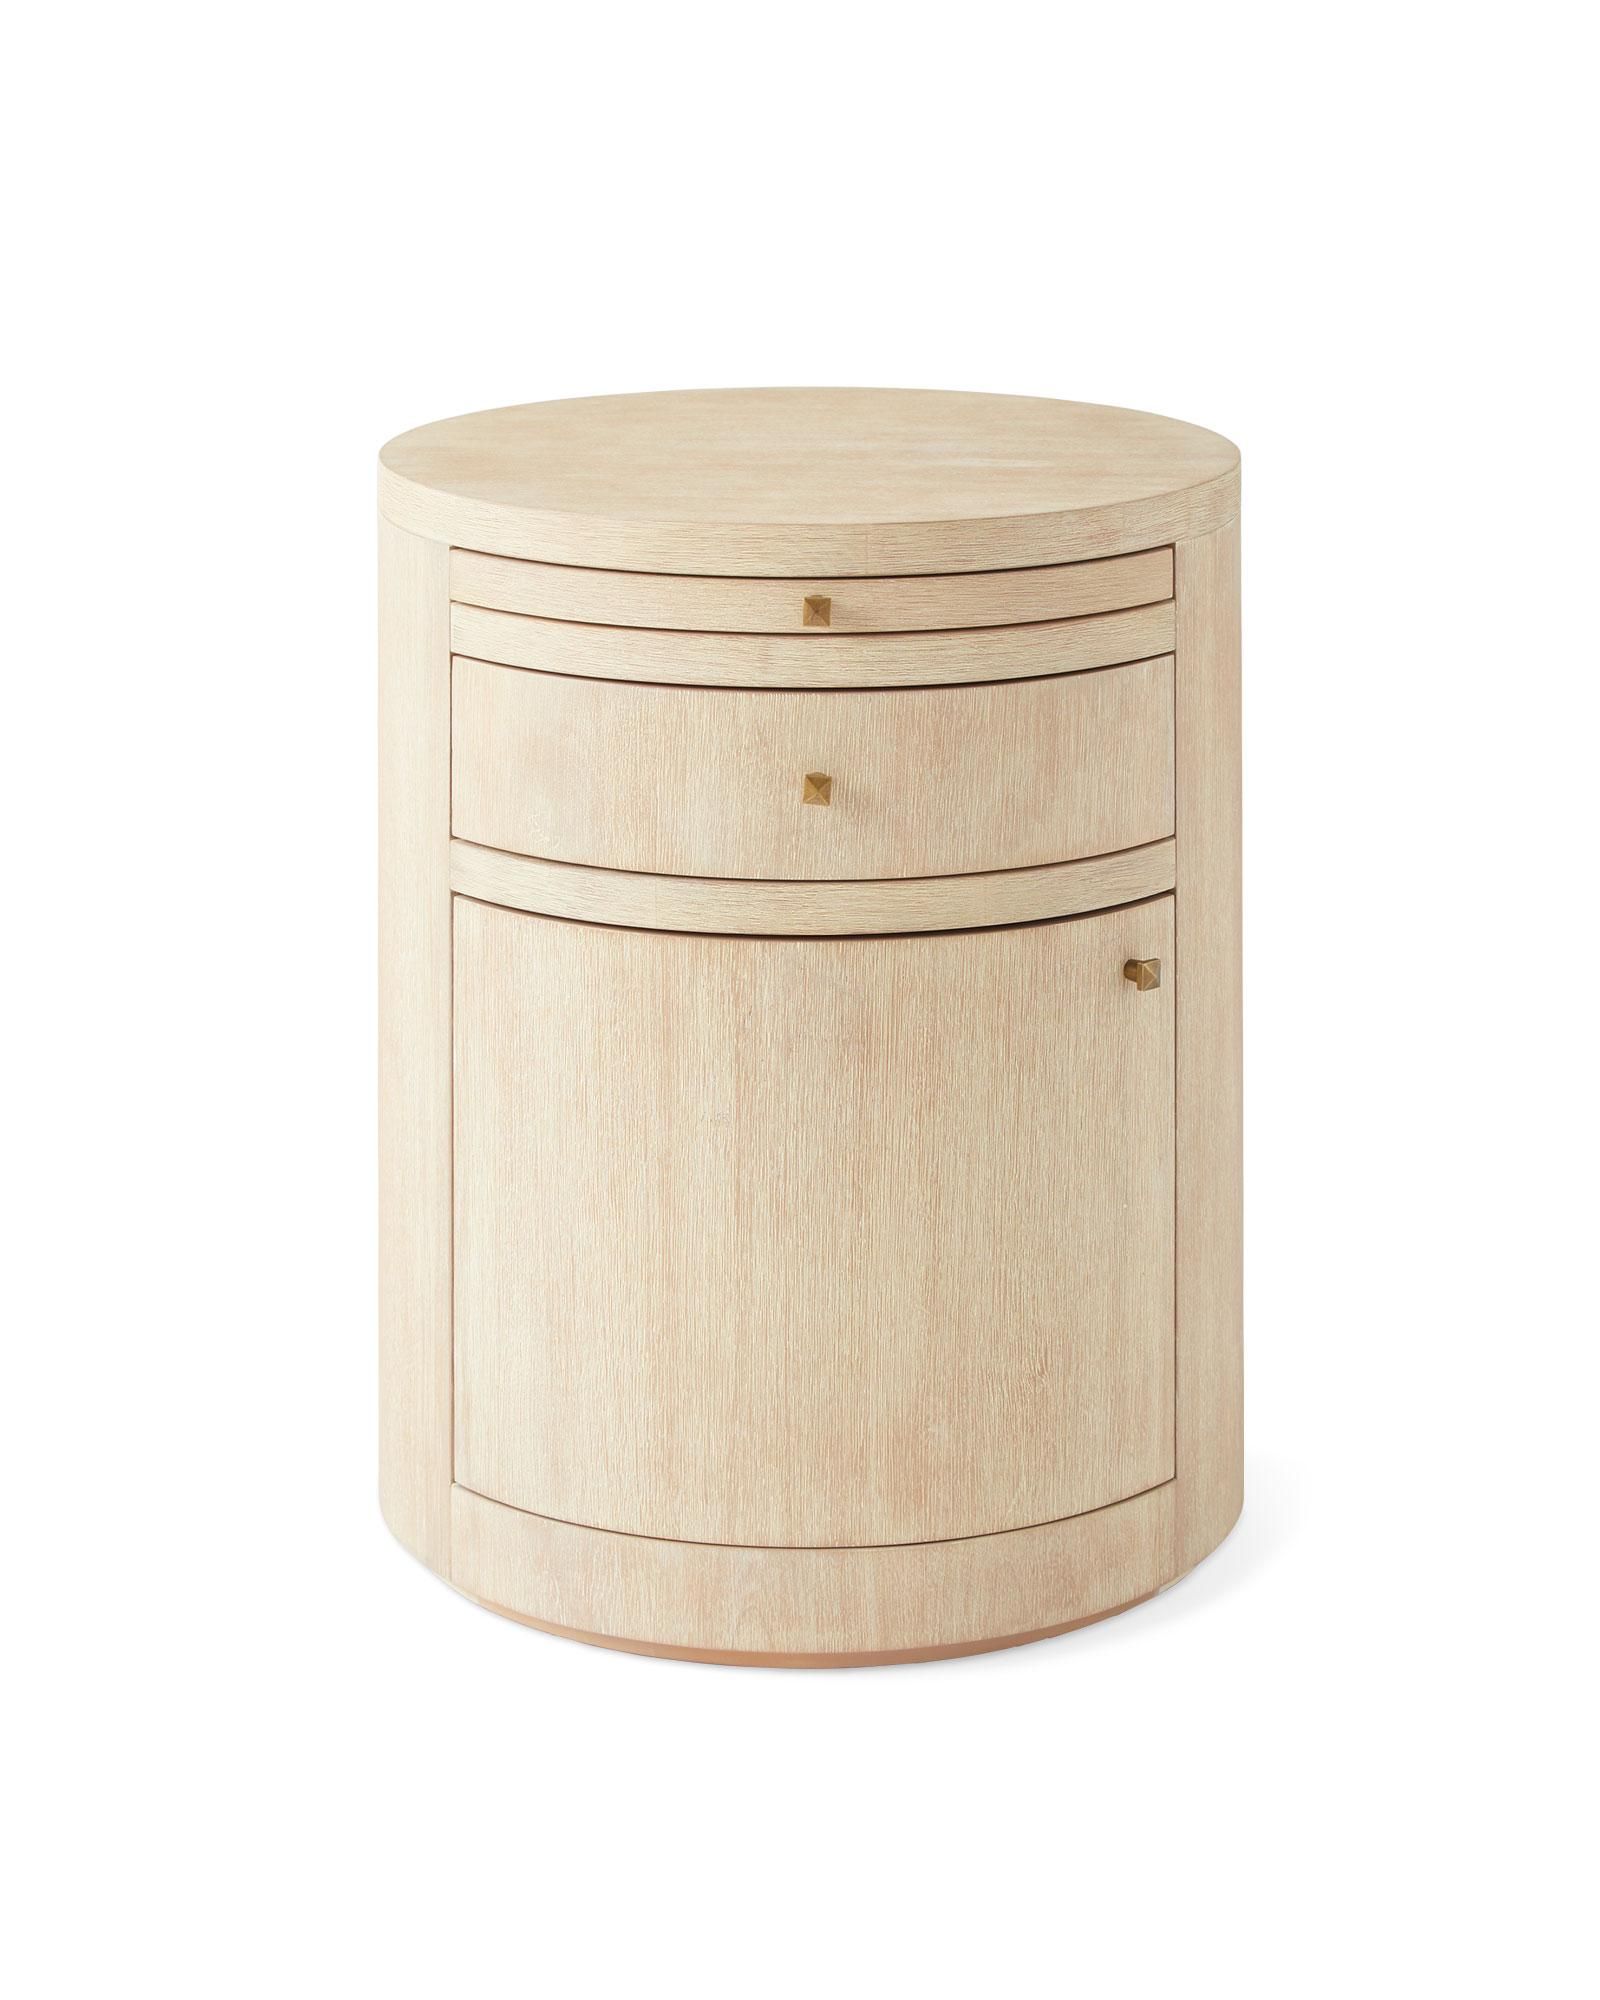 Pinecrest Side Table | Serena and Lily